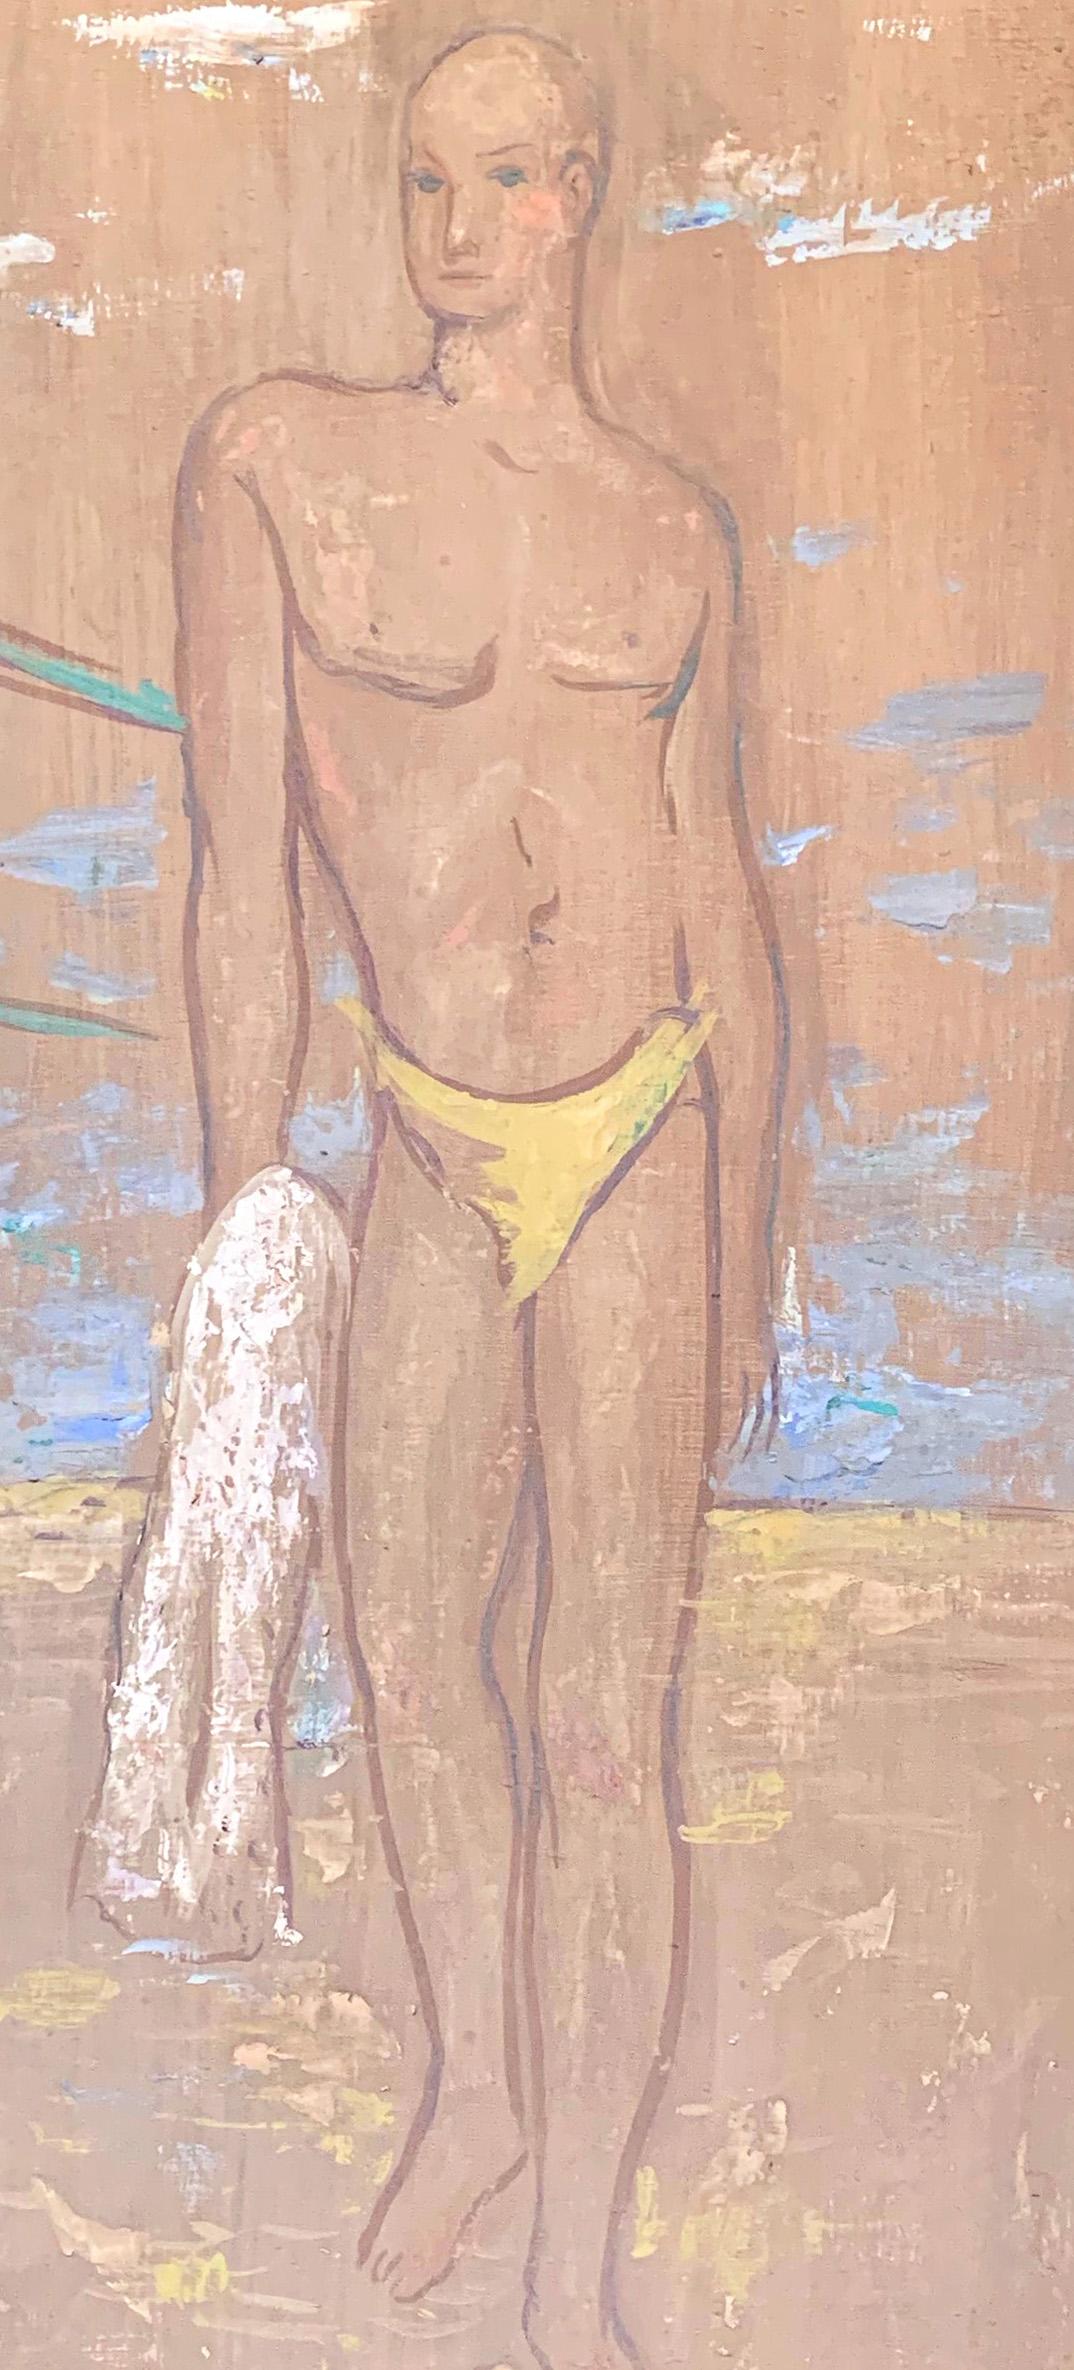 This pale, almost ghostly painting by John Winters depicts a tall, lithe young man with a yellow swimsuit and towel on the beach along Lake Michigan in Chicago, with two other figures under a sheltering canopy to one side. The figure and the setting